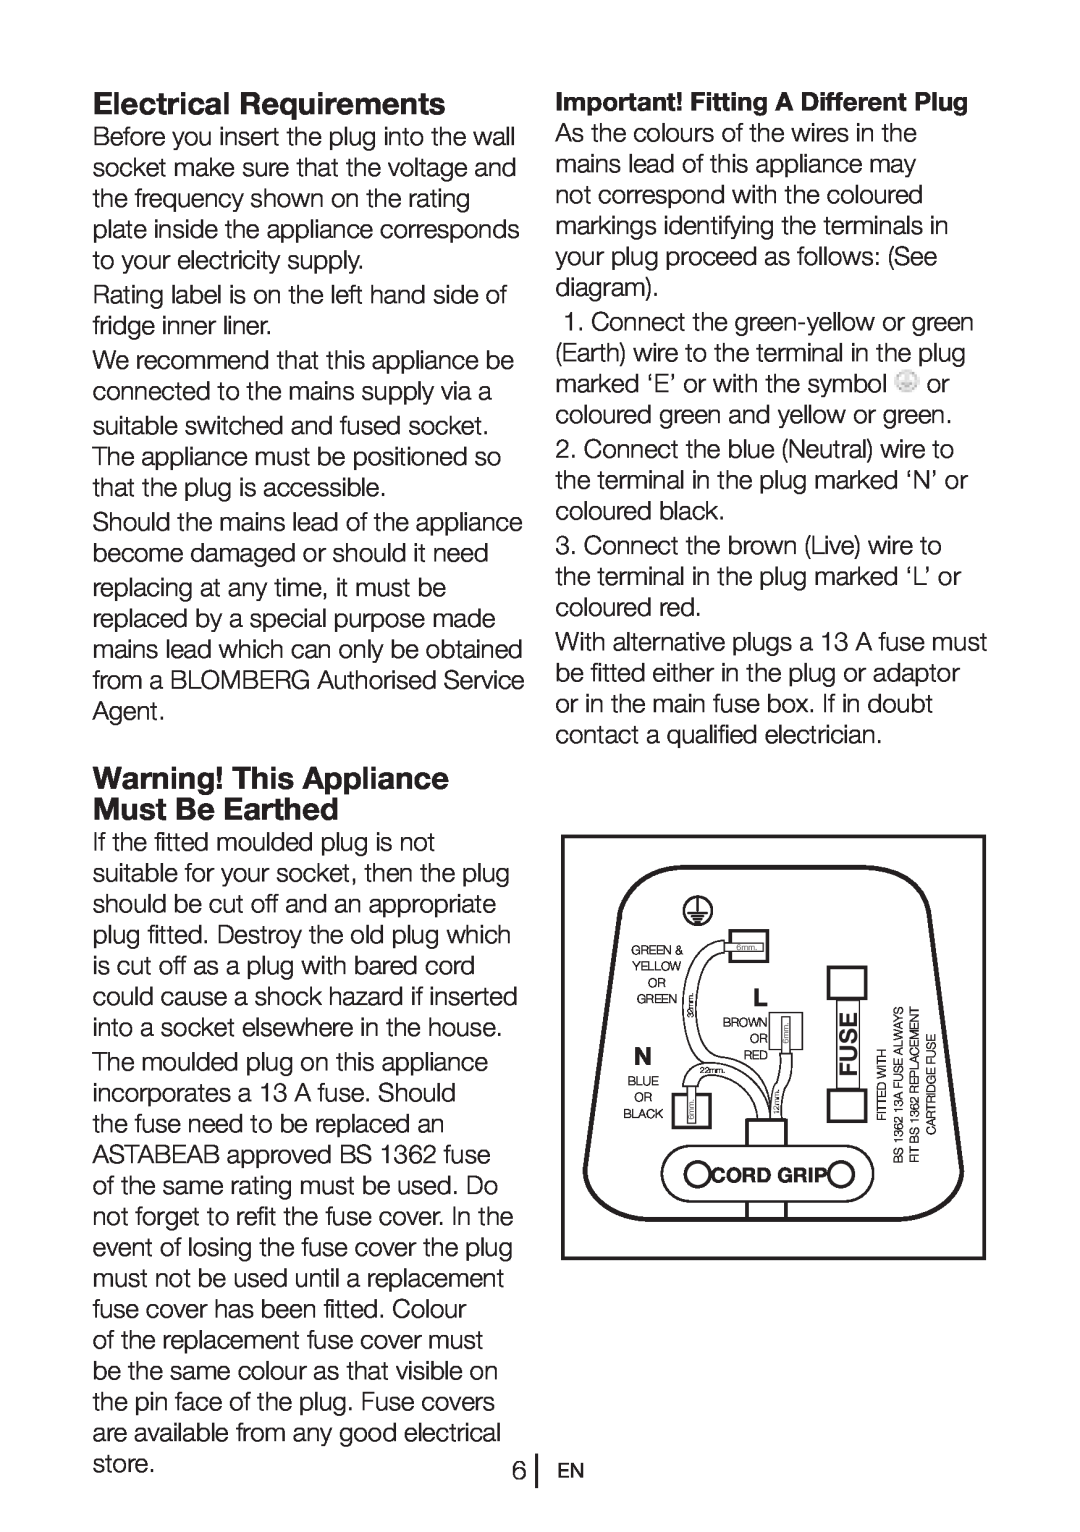 Blomberg TSM 1541P Electrical Requirements, Warning! This Appliance Must Be Earthed, Important! Fitting A Different Plug 